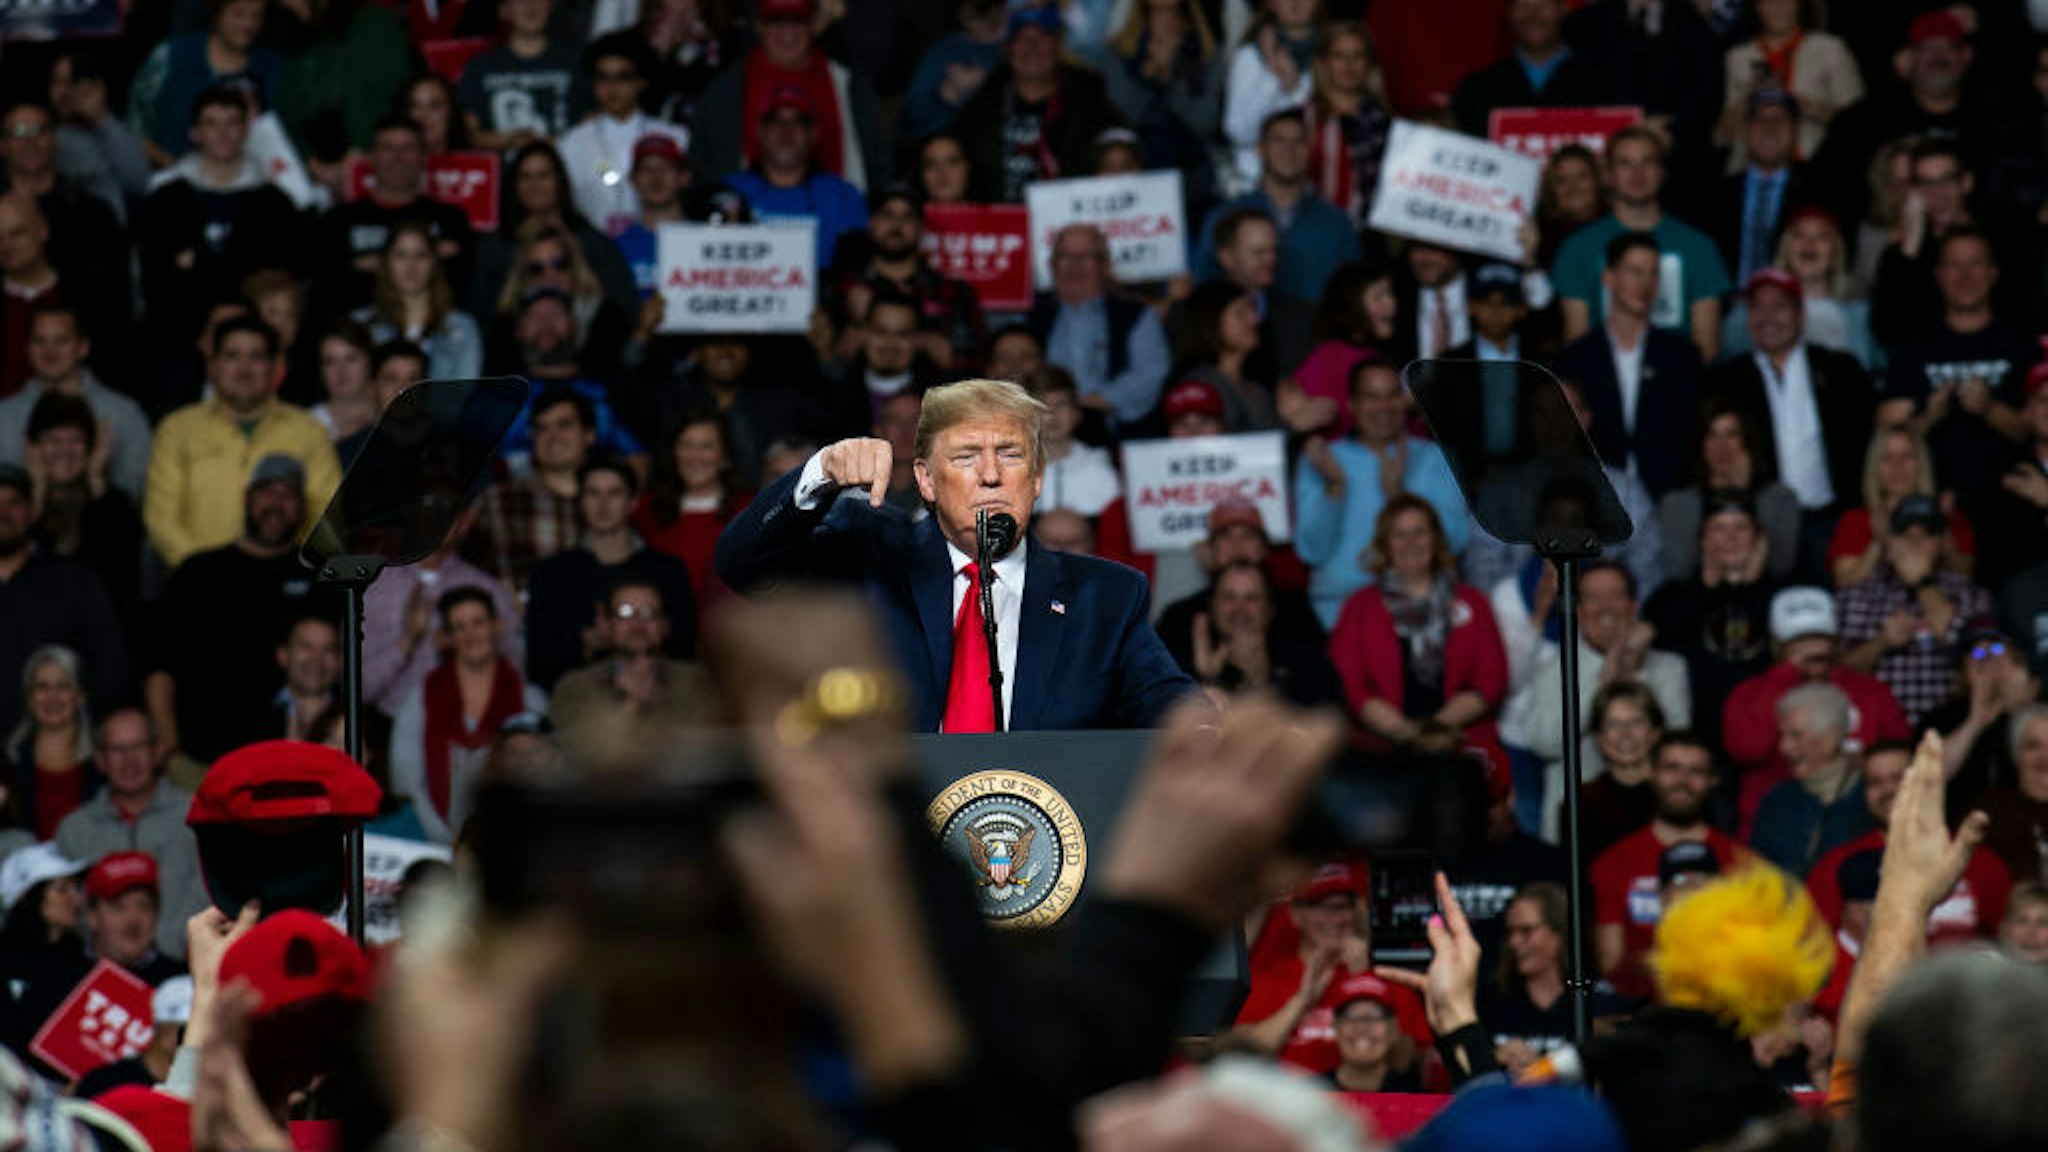 President Donald Trump speaks at a "Keep America Great" campaign rally at the Huntington Center on January 9, 2020 in Toledo, Ohio. President Trump won the swing state of Ohio in 2016 by eight points over his opponent Hillary Clinton. (Photo by Brittany Greeson/Getty Images)